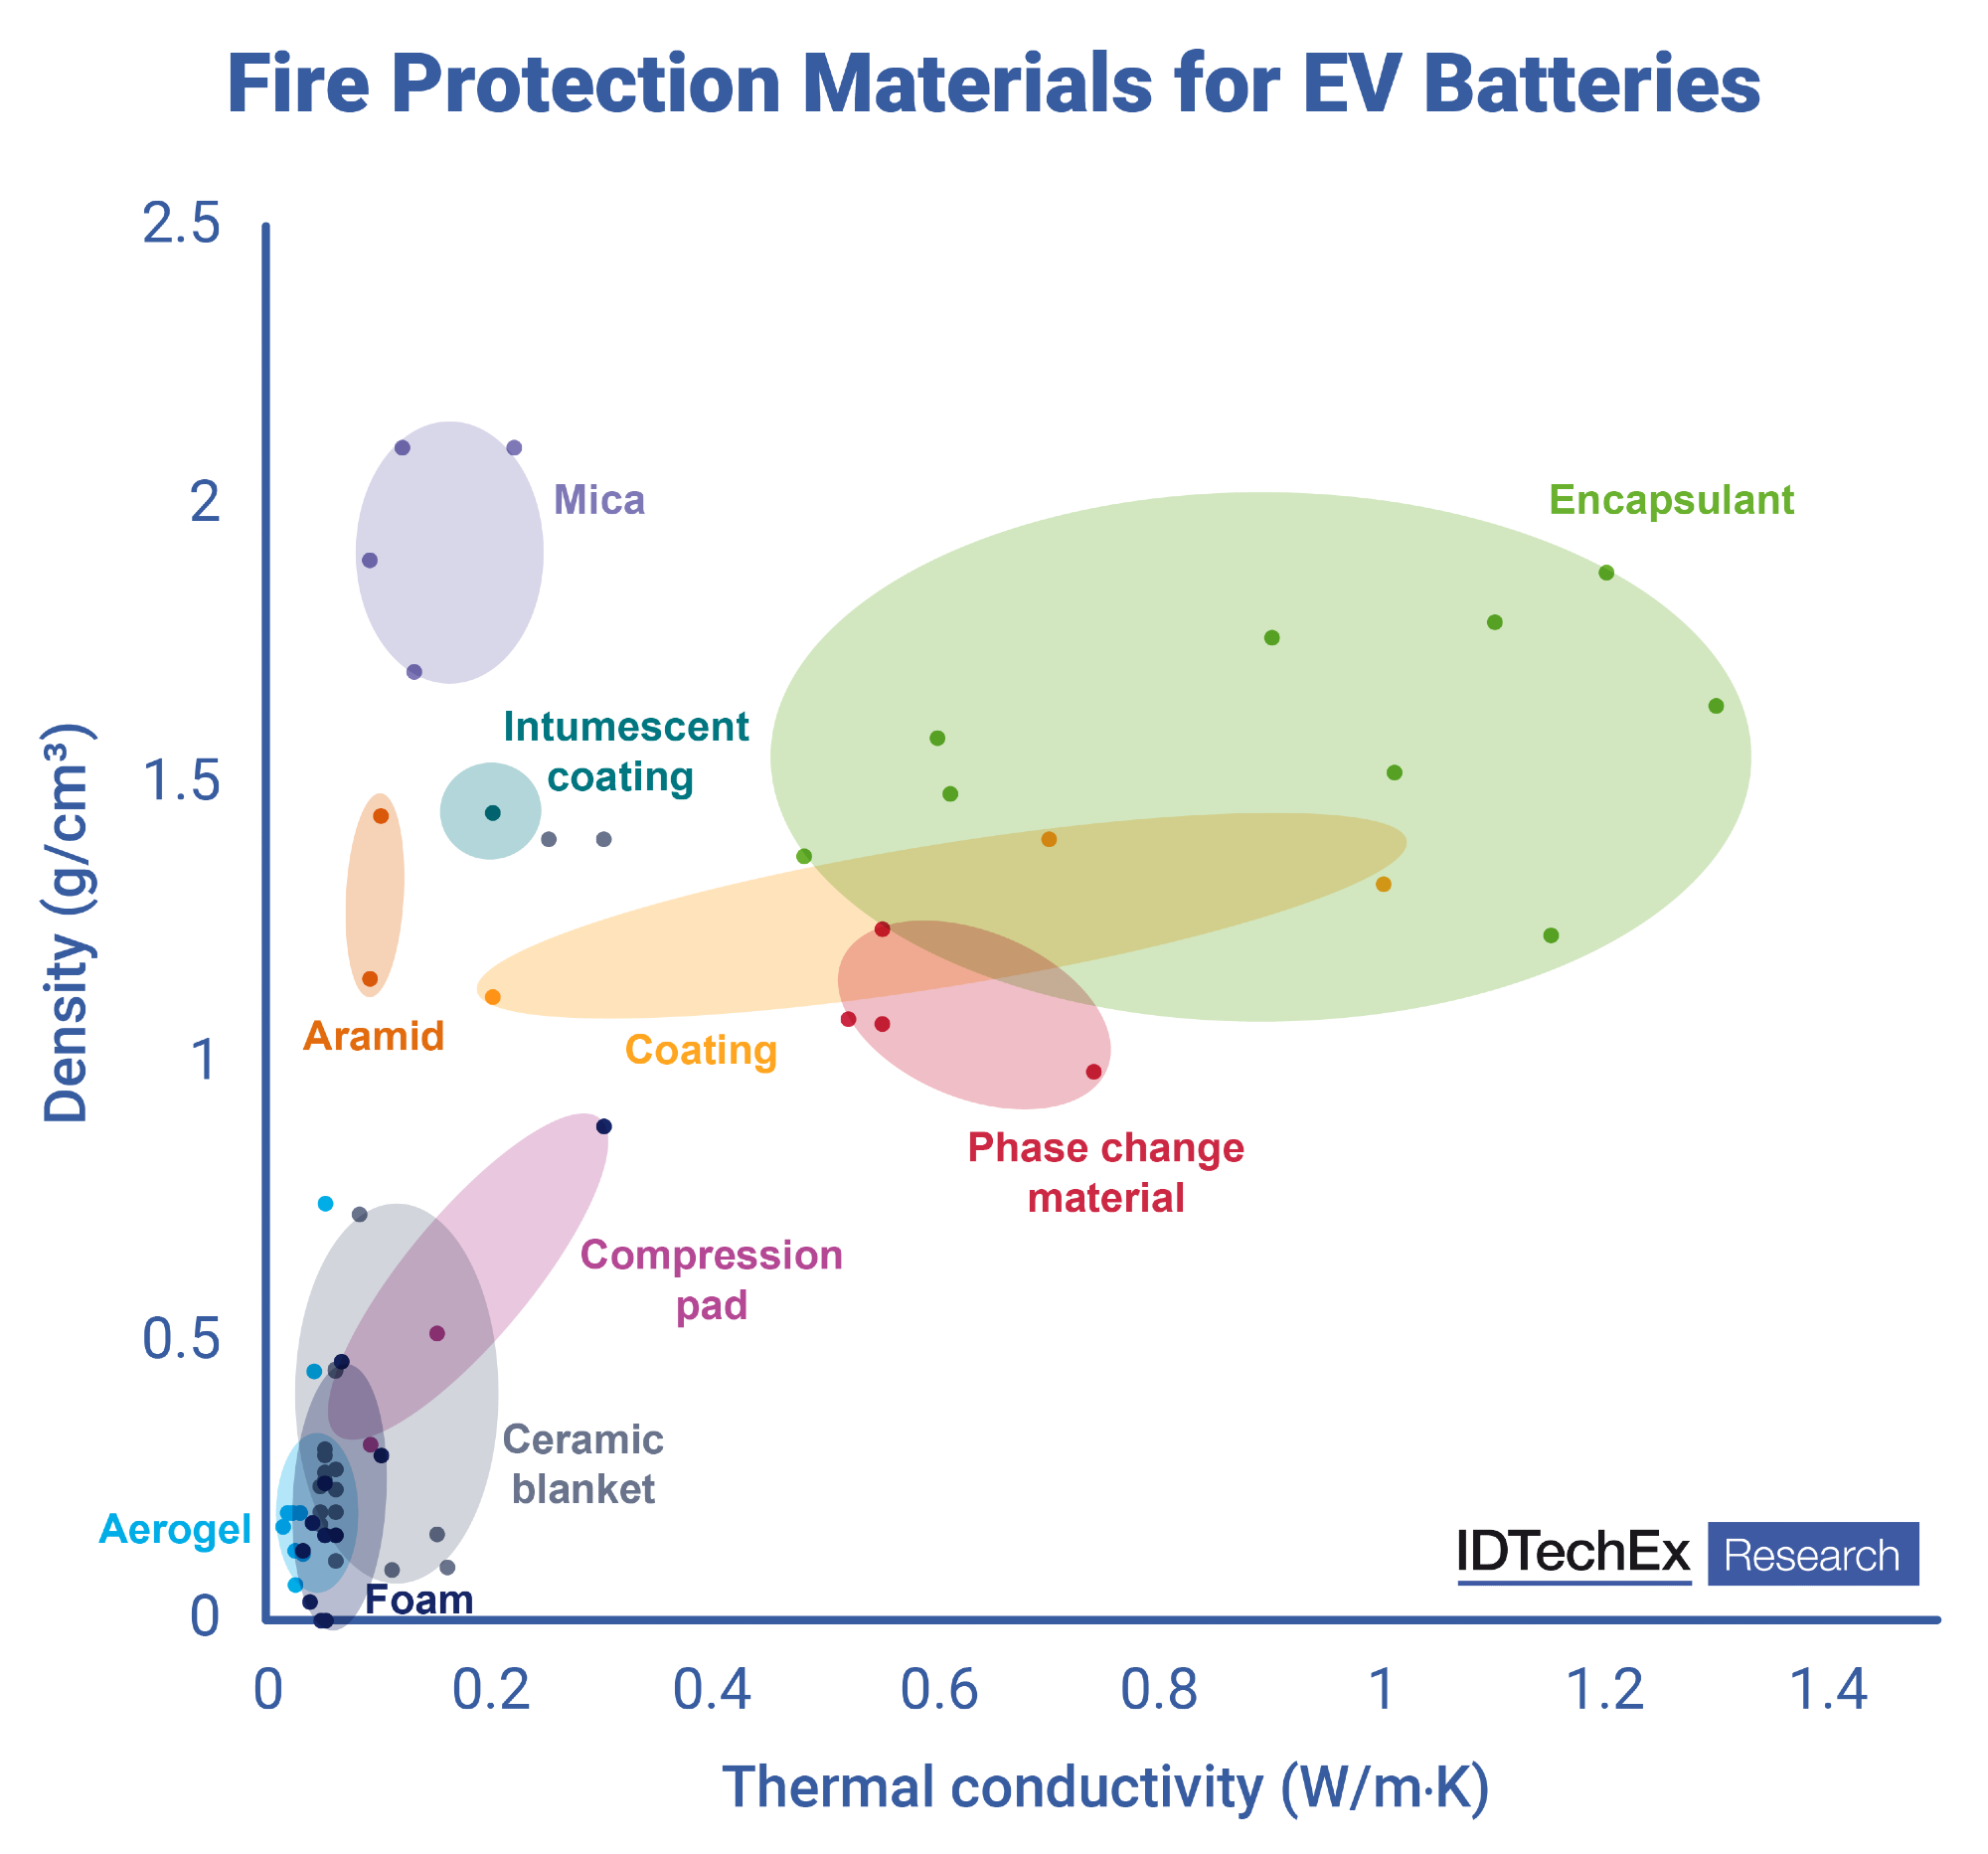 EV Fire Protection Materials, Protecting a US$3.5 Trillion Market: IDTechEx Predictions